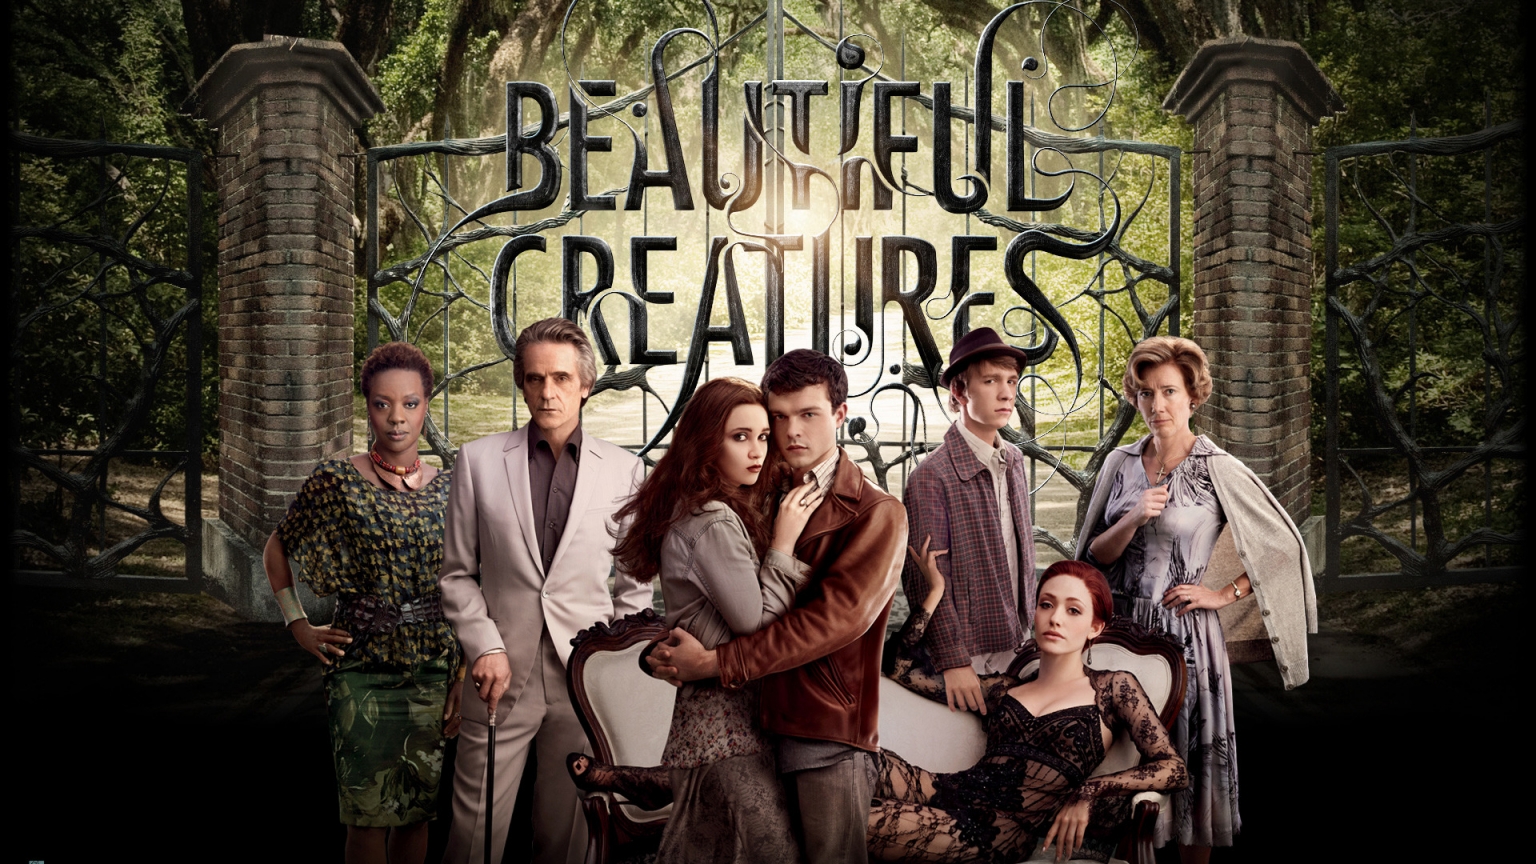 Beautiful Creatures Cast for 1536 x 864 HDTV resolution